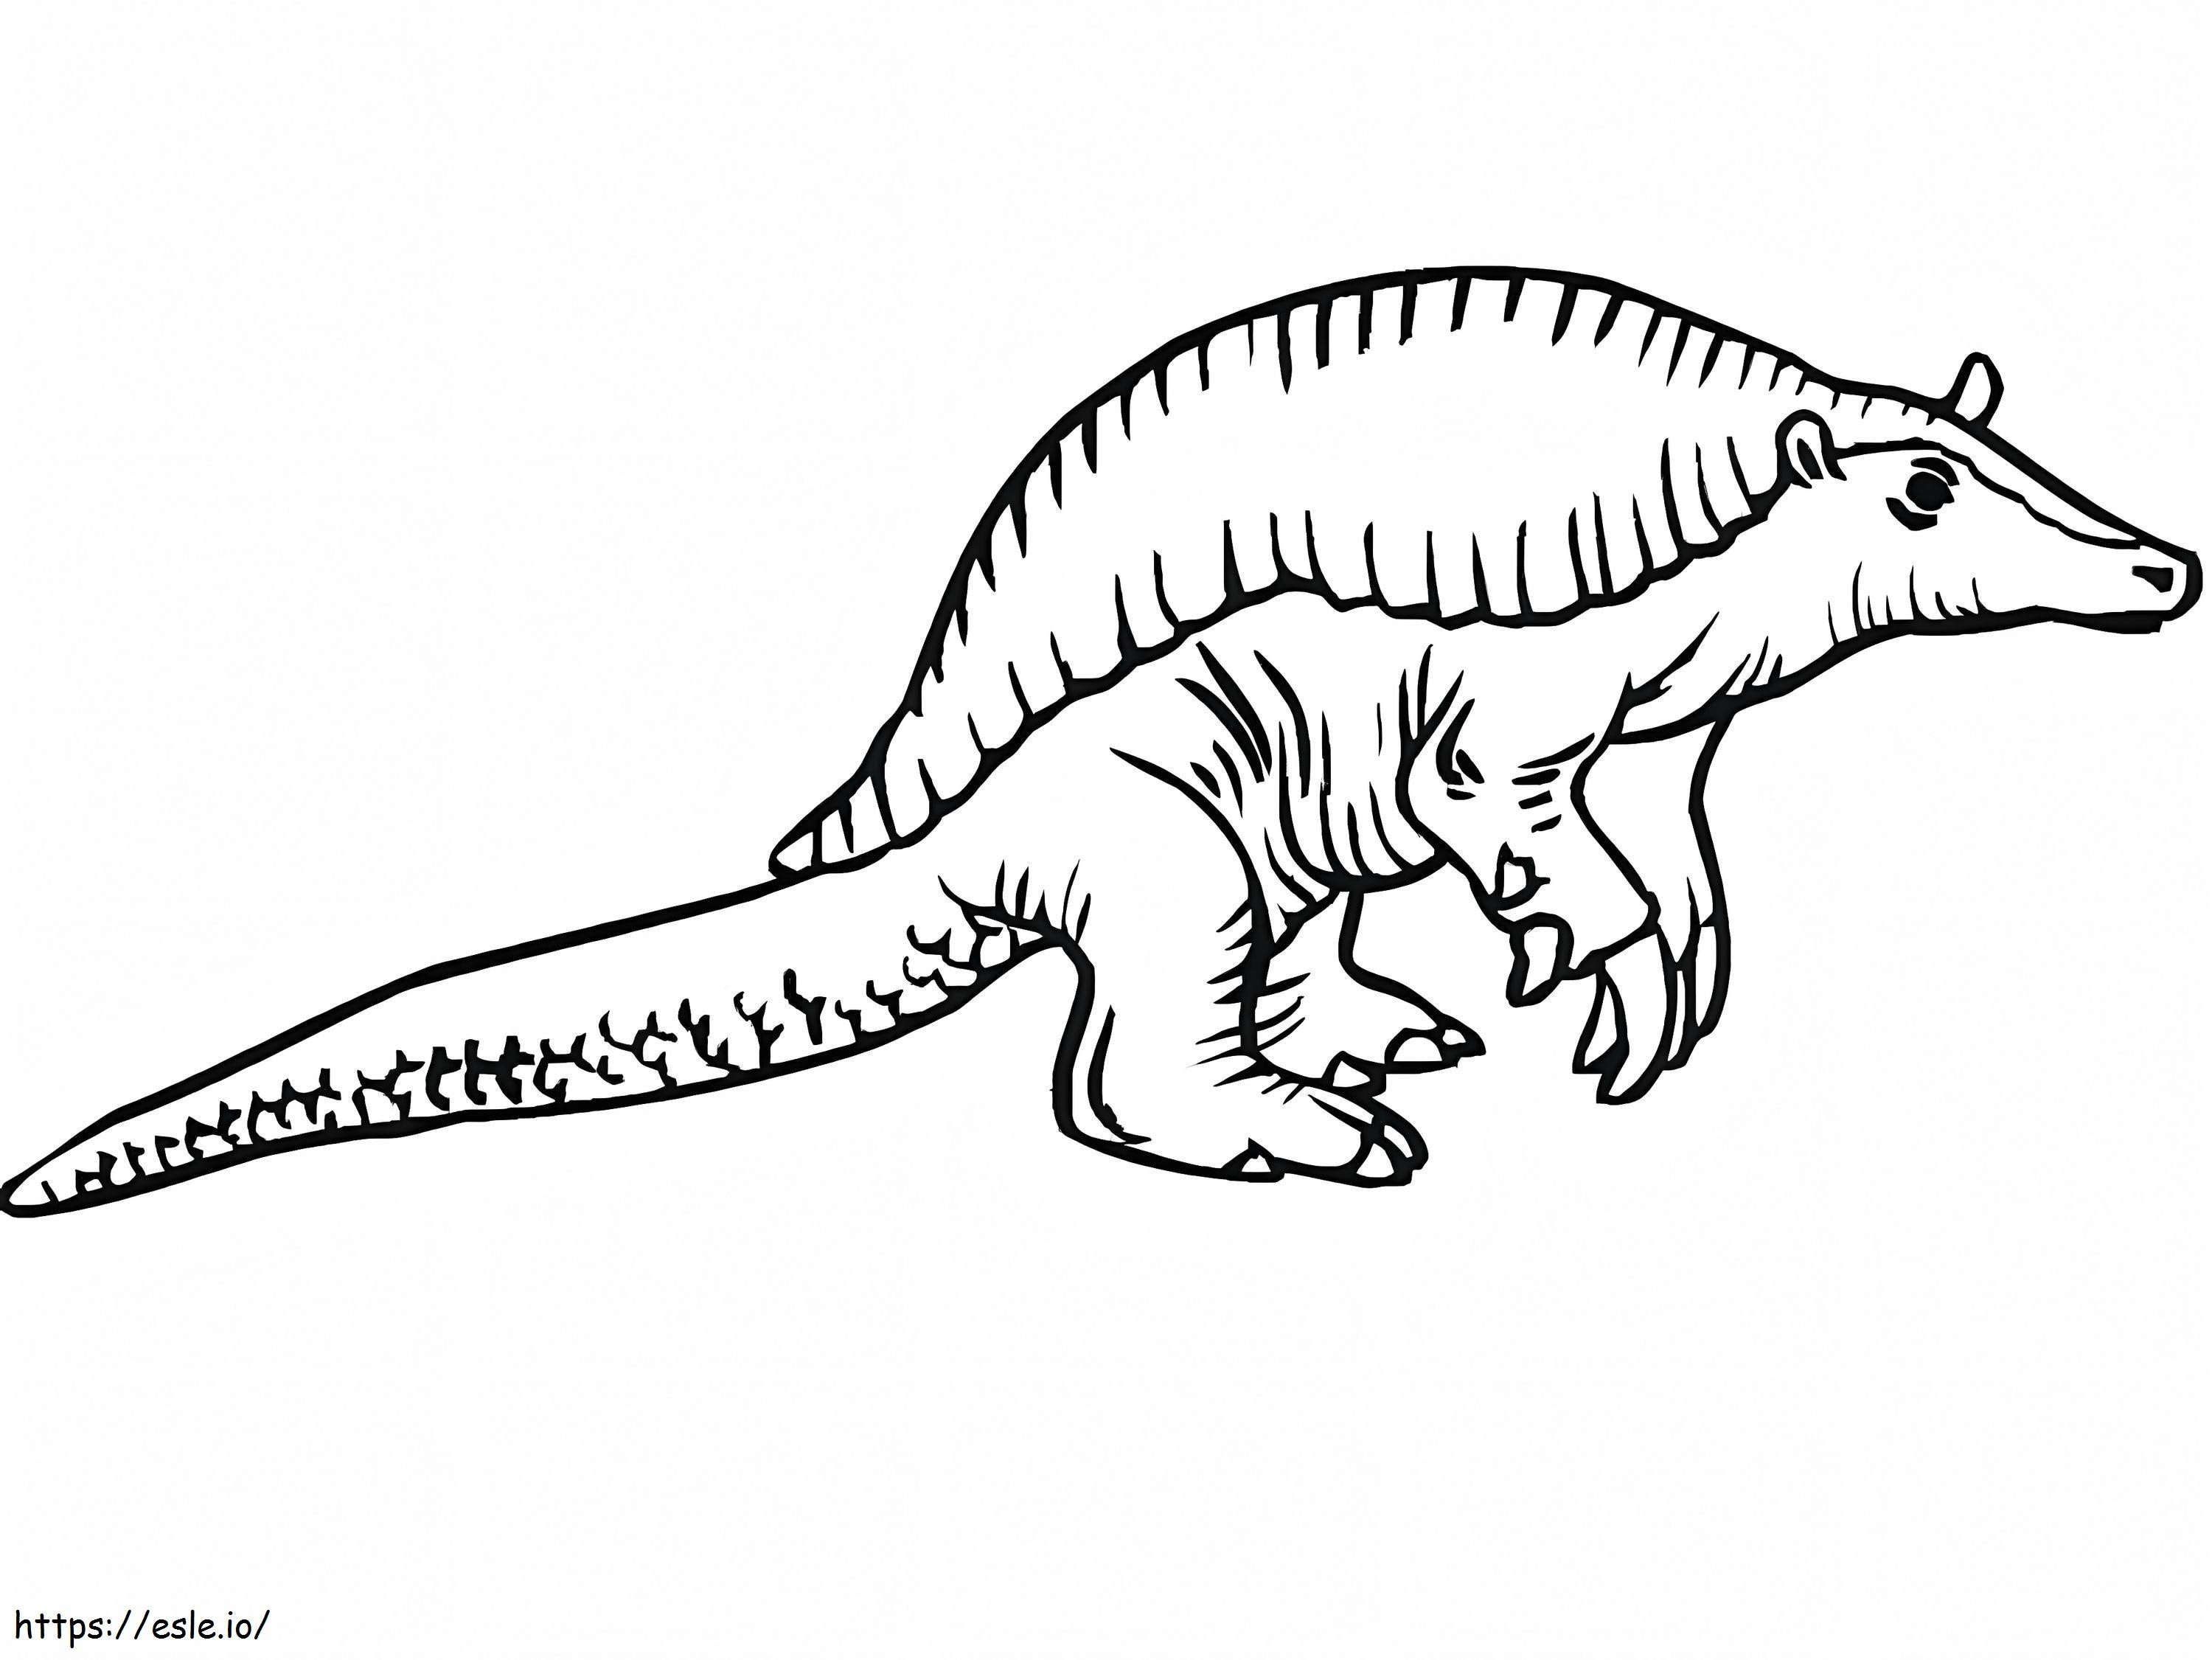 Giant Armadillo coloring page